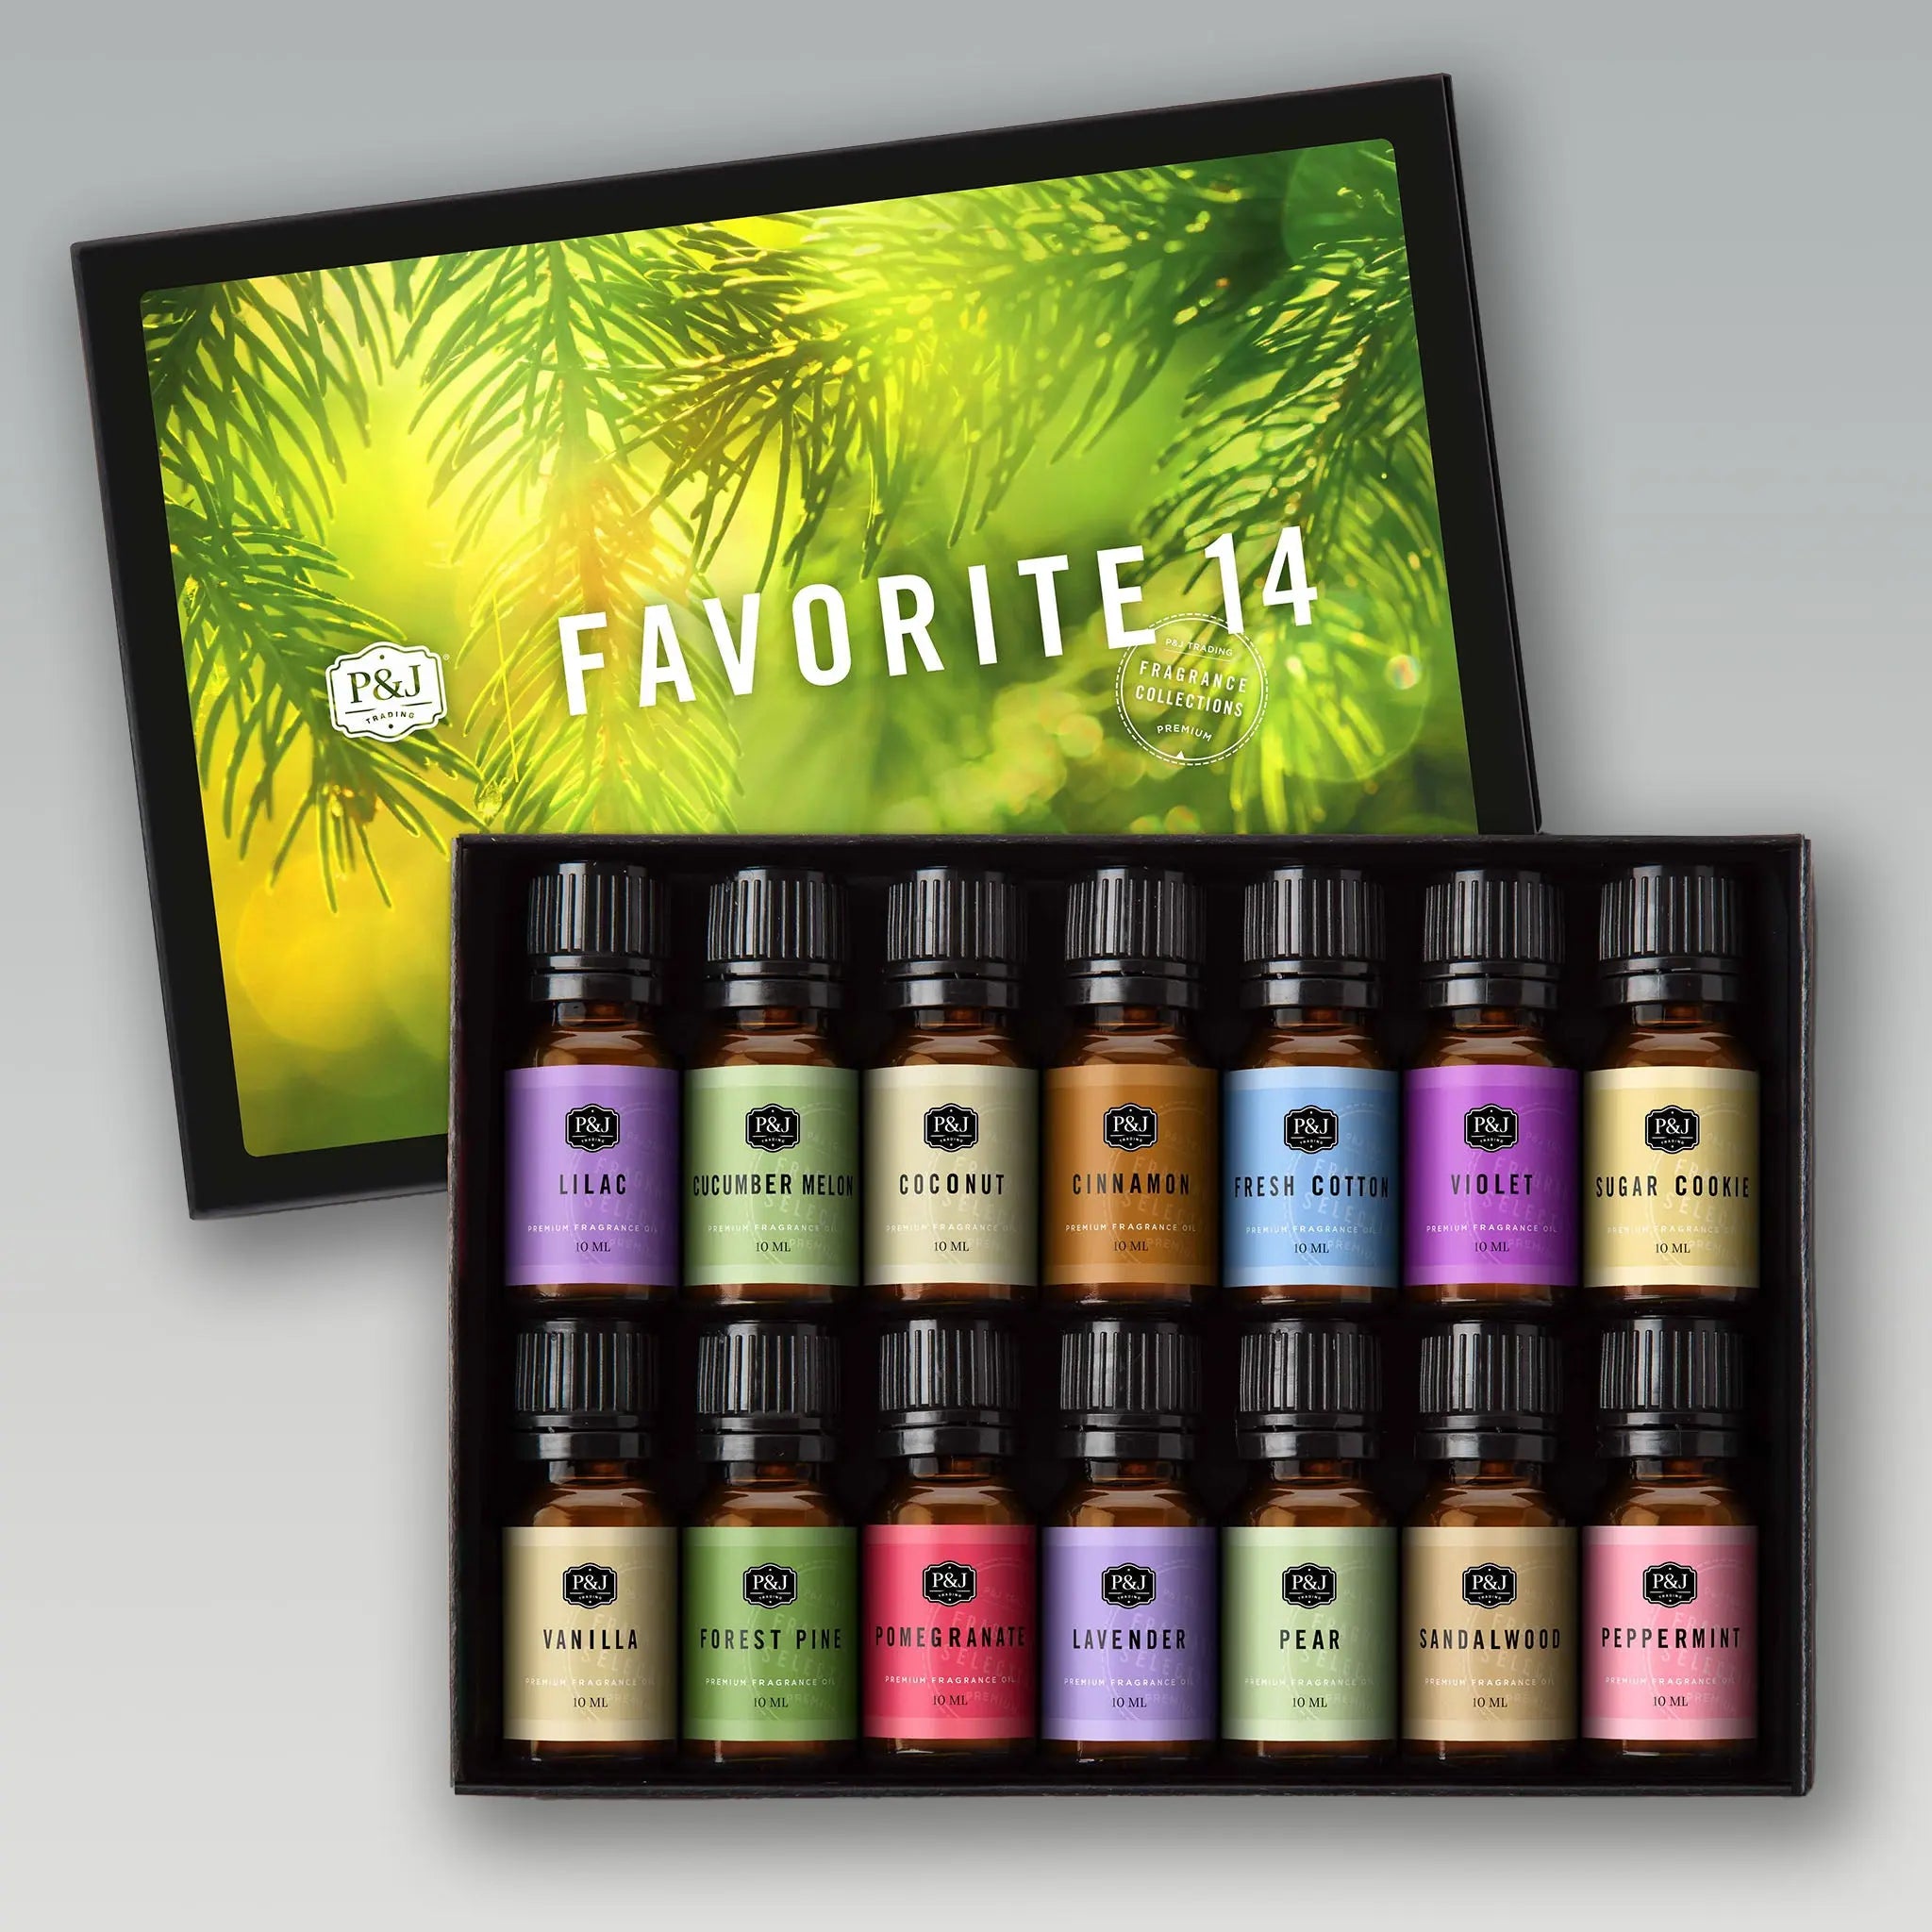 P&J Fragrance Favorites Set | Strawberry, Lilac, Cucumber Melon, Coconut,  Gardenia, Woodbine Scents for Candle, Soap & Diffuser Oil Making